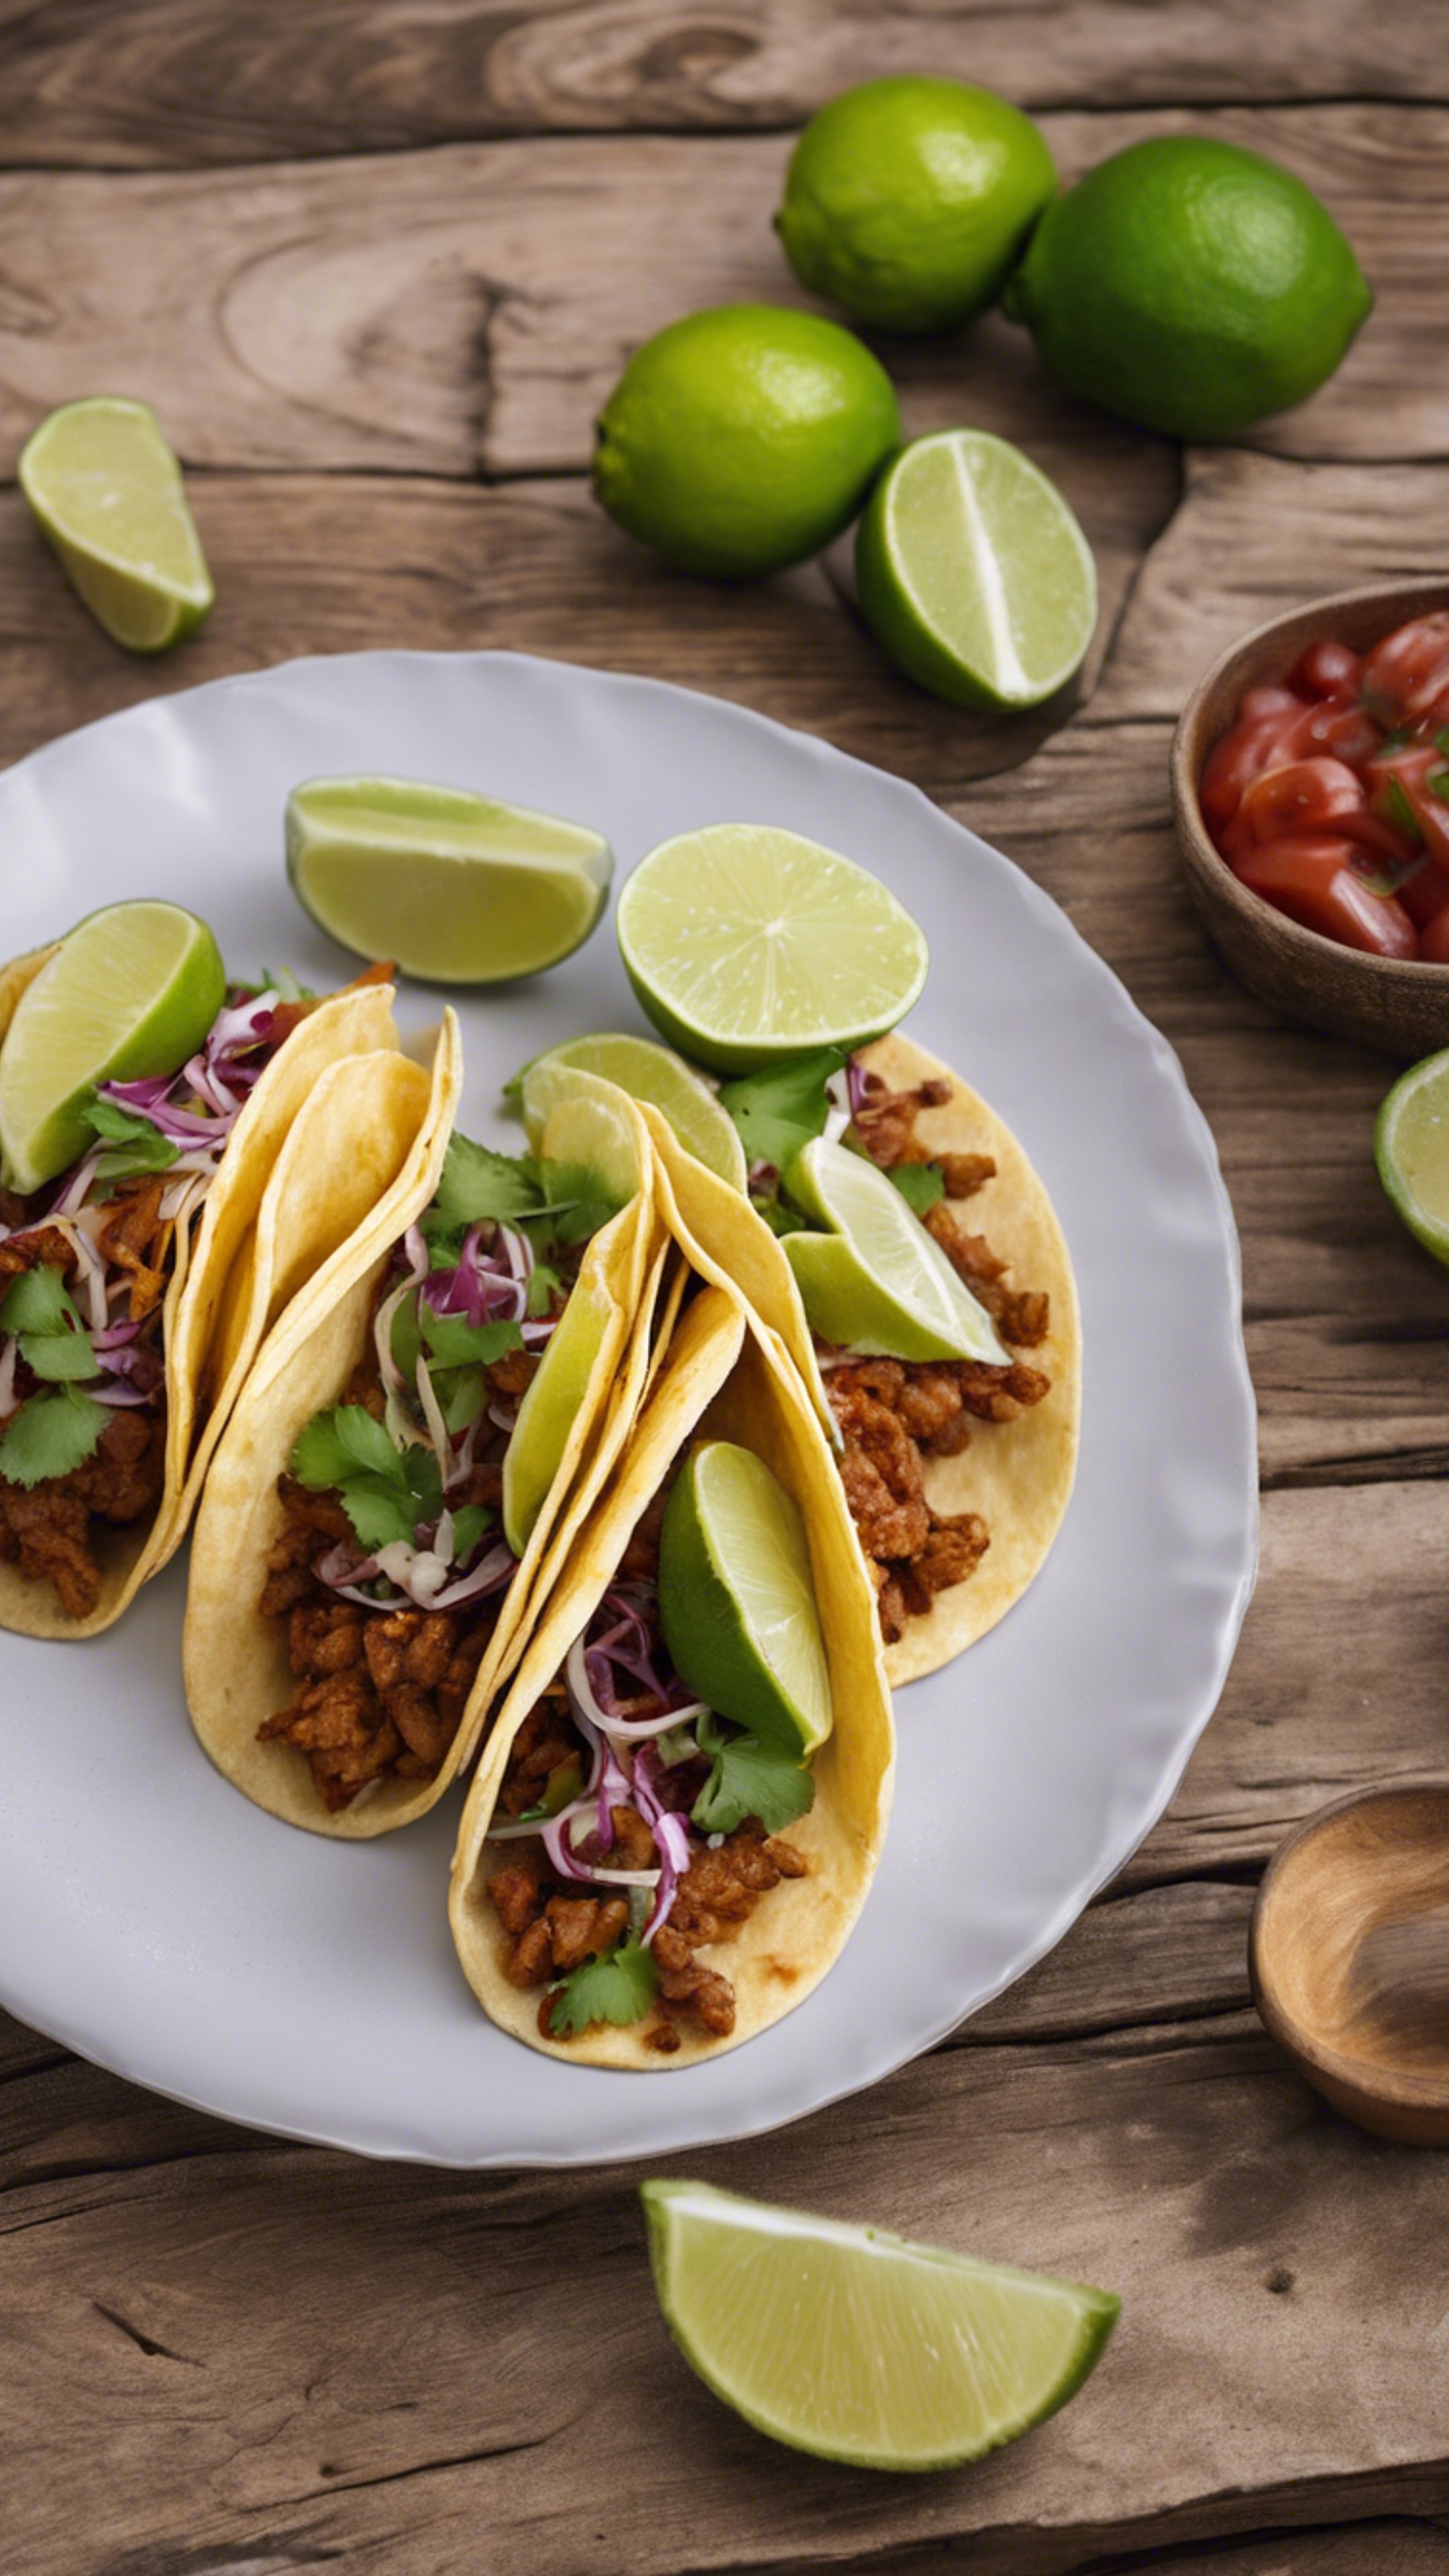 A plate of tacos garnished with fresh lime wedges on a rustic wooden table. Papel de parede[5f6c6b777f9c4d0caf3c]